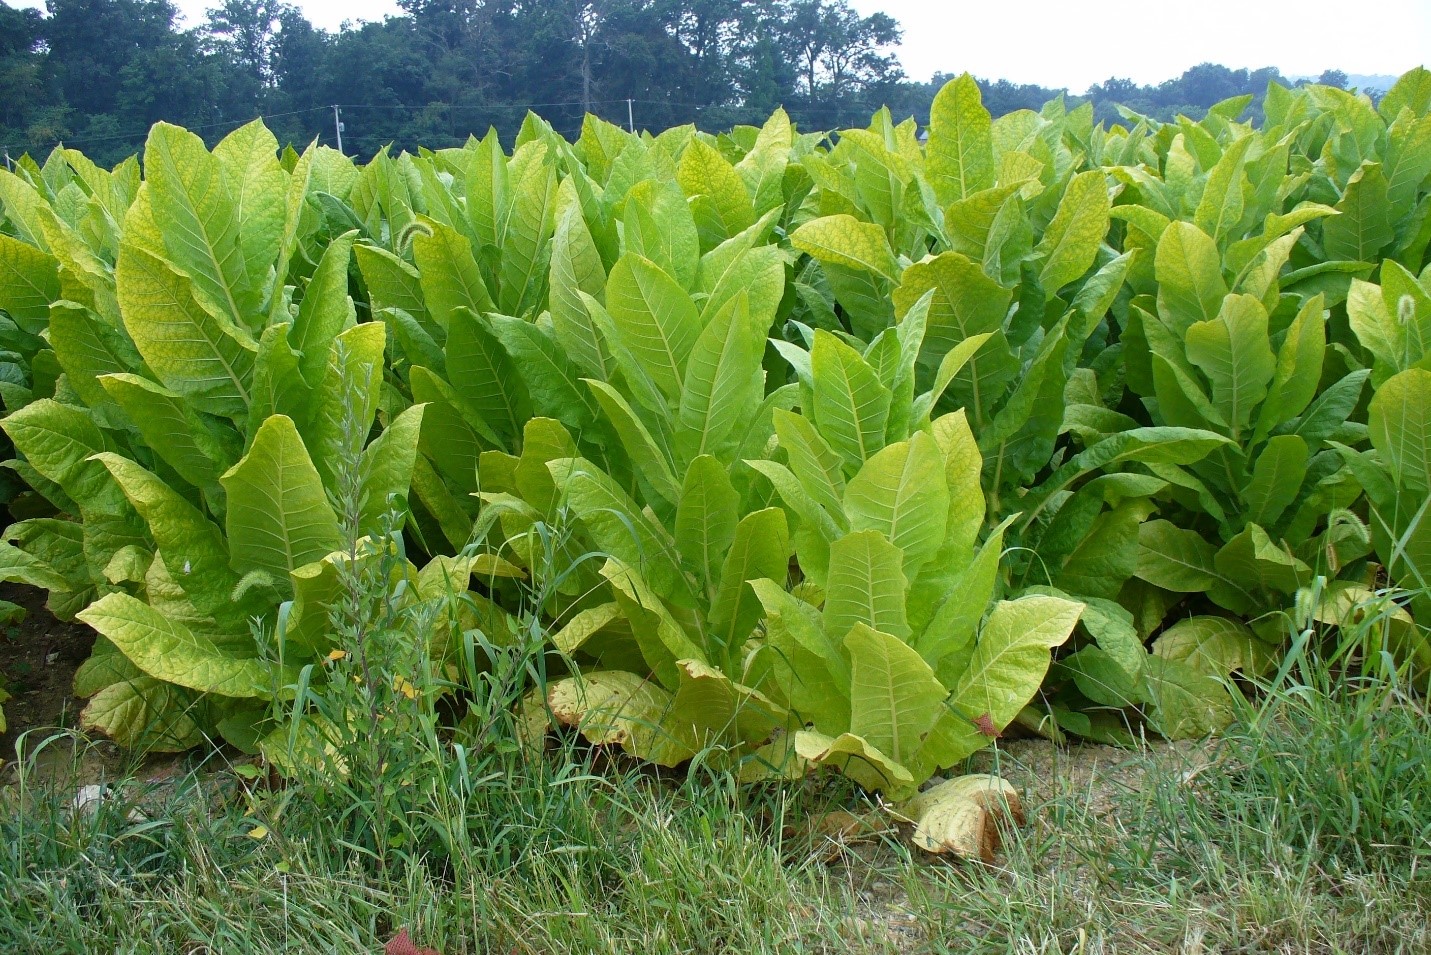 A color photograph of tobacco plants growing in Pennsylvania.